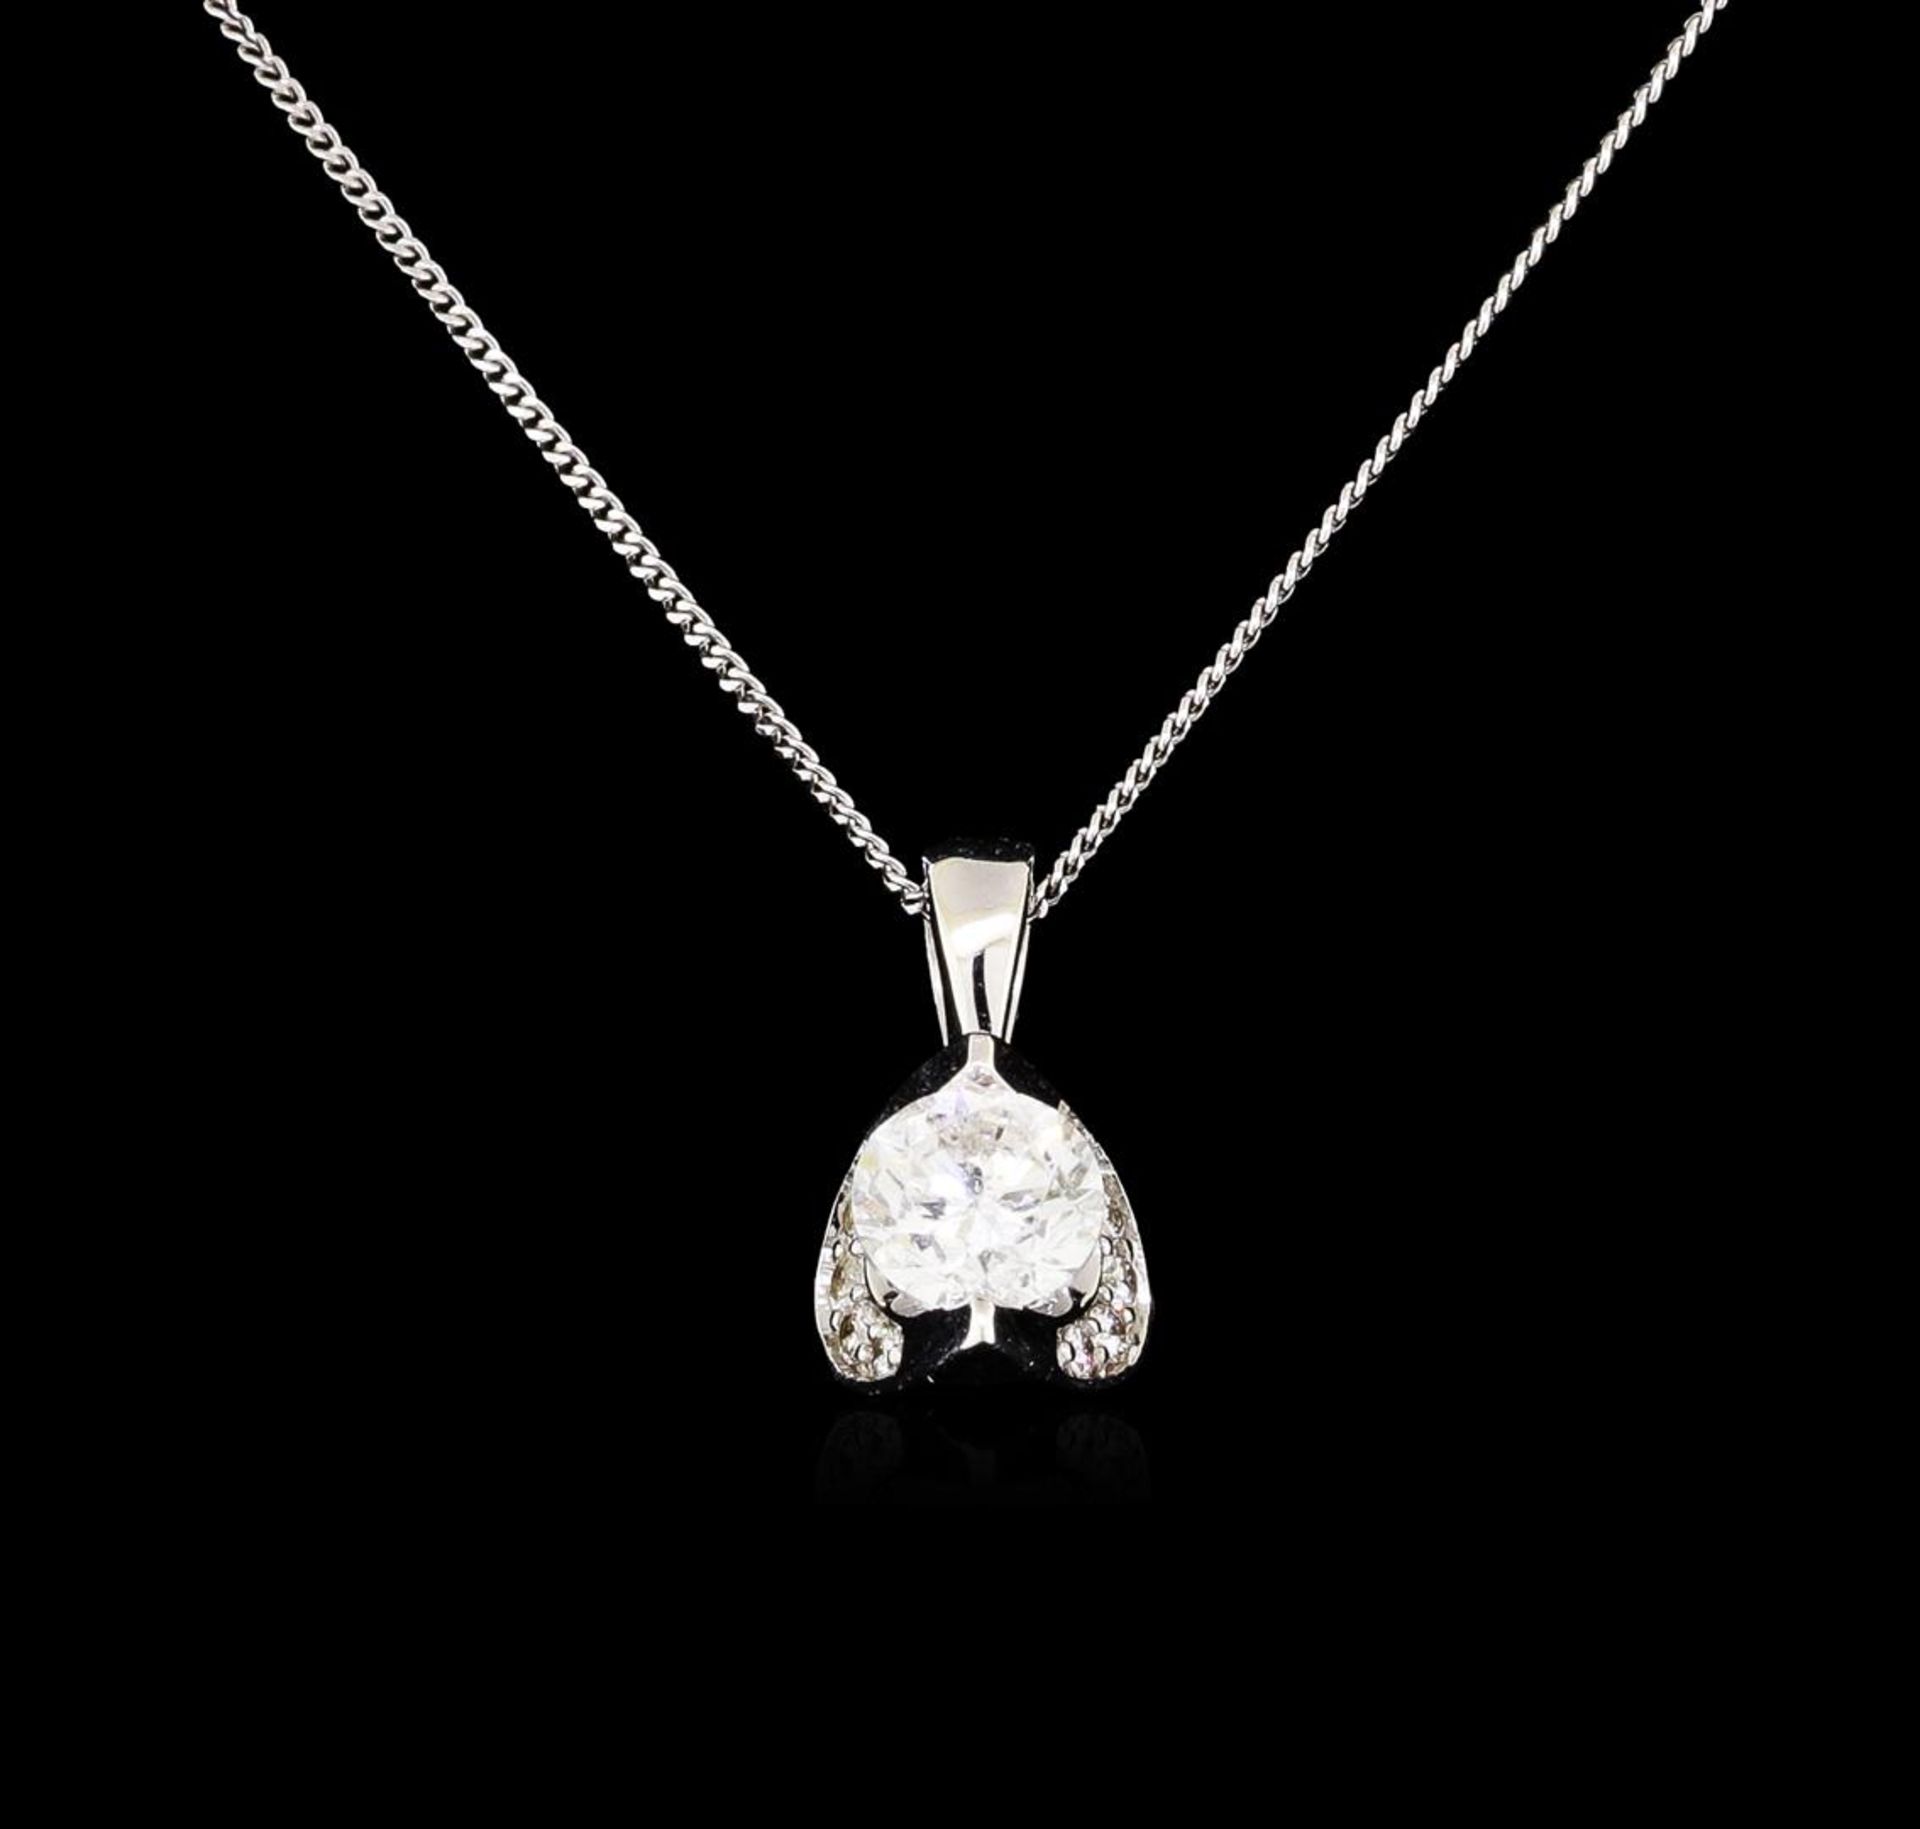 0.50 ctw Diamond Pendant And Chain - 14KT White Gold - Image 2 of 3